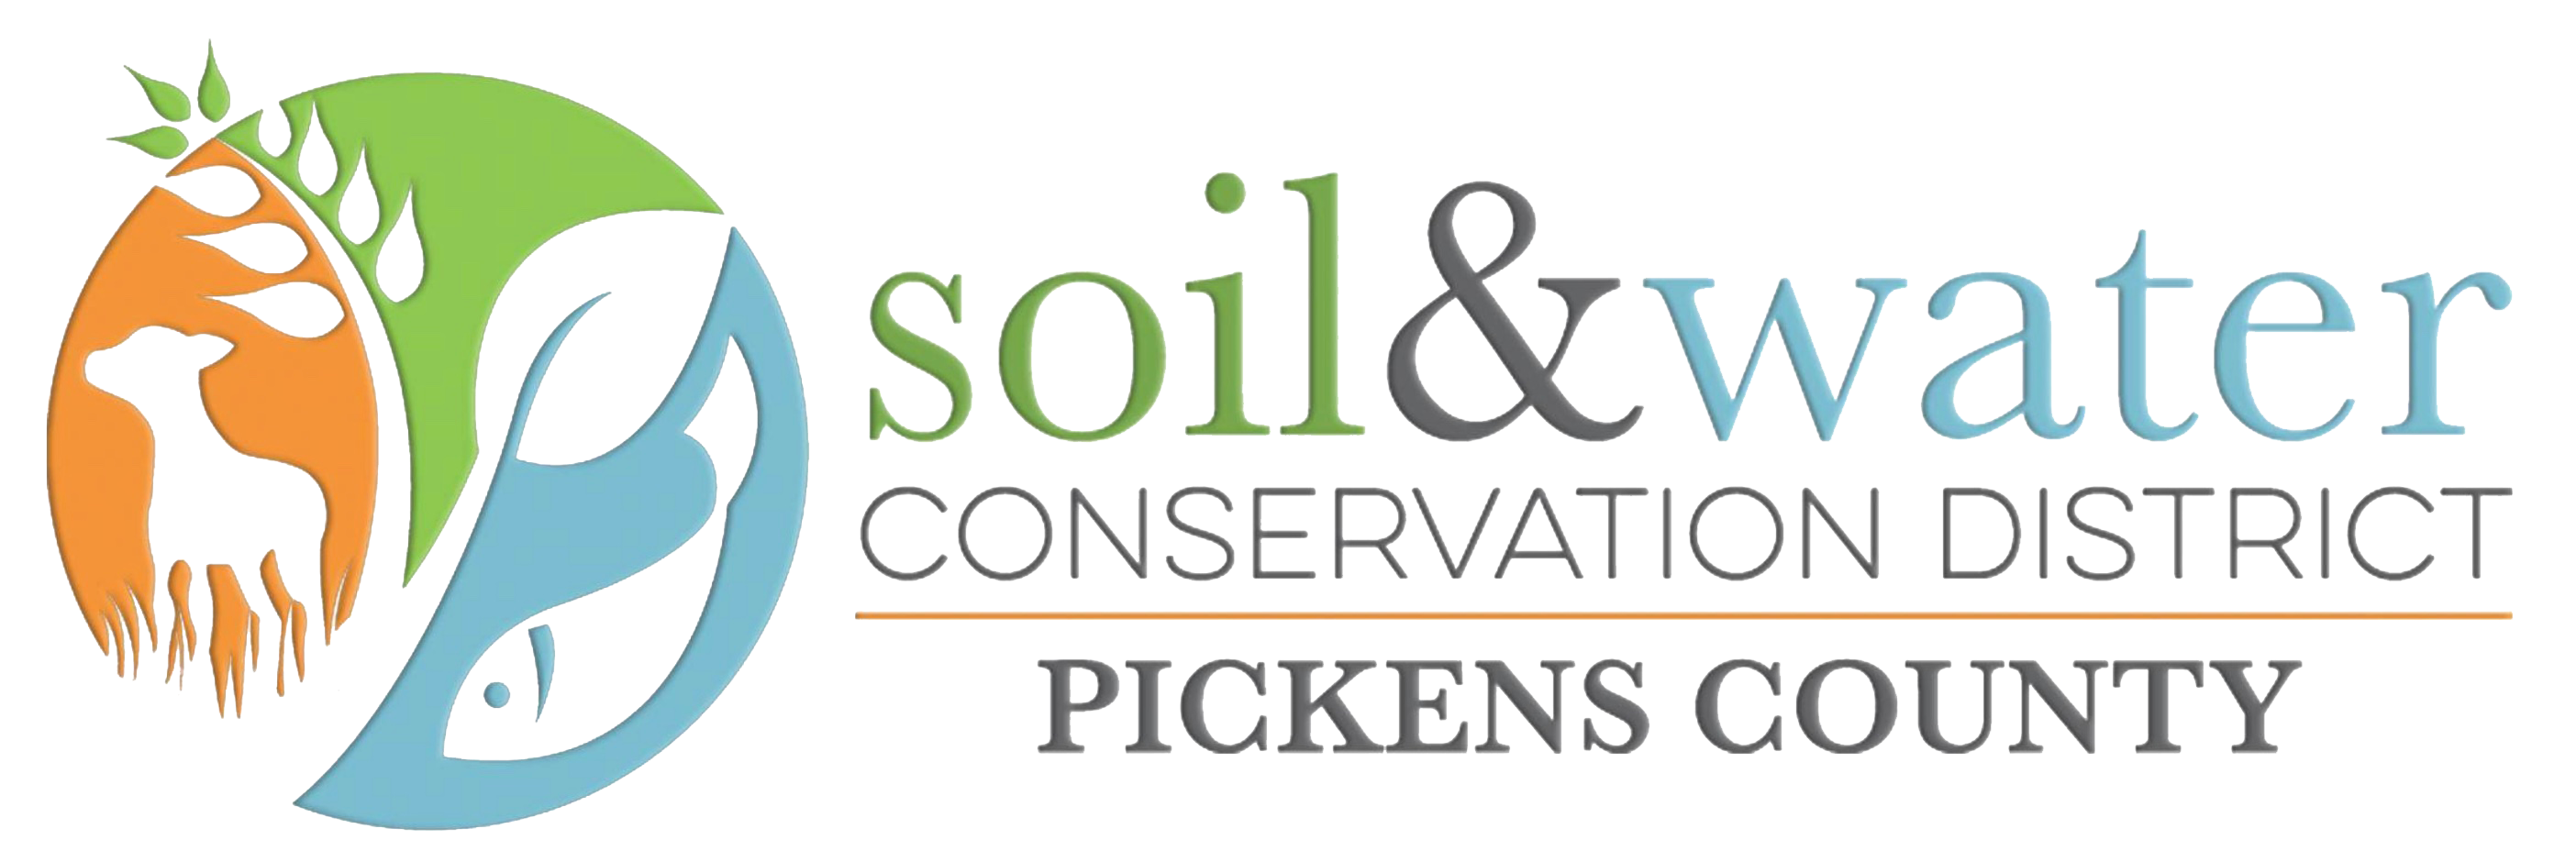 Pickens Soil & Water Conservation District